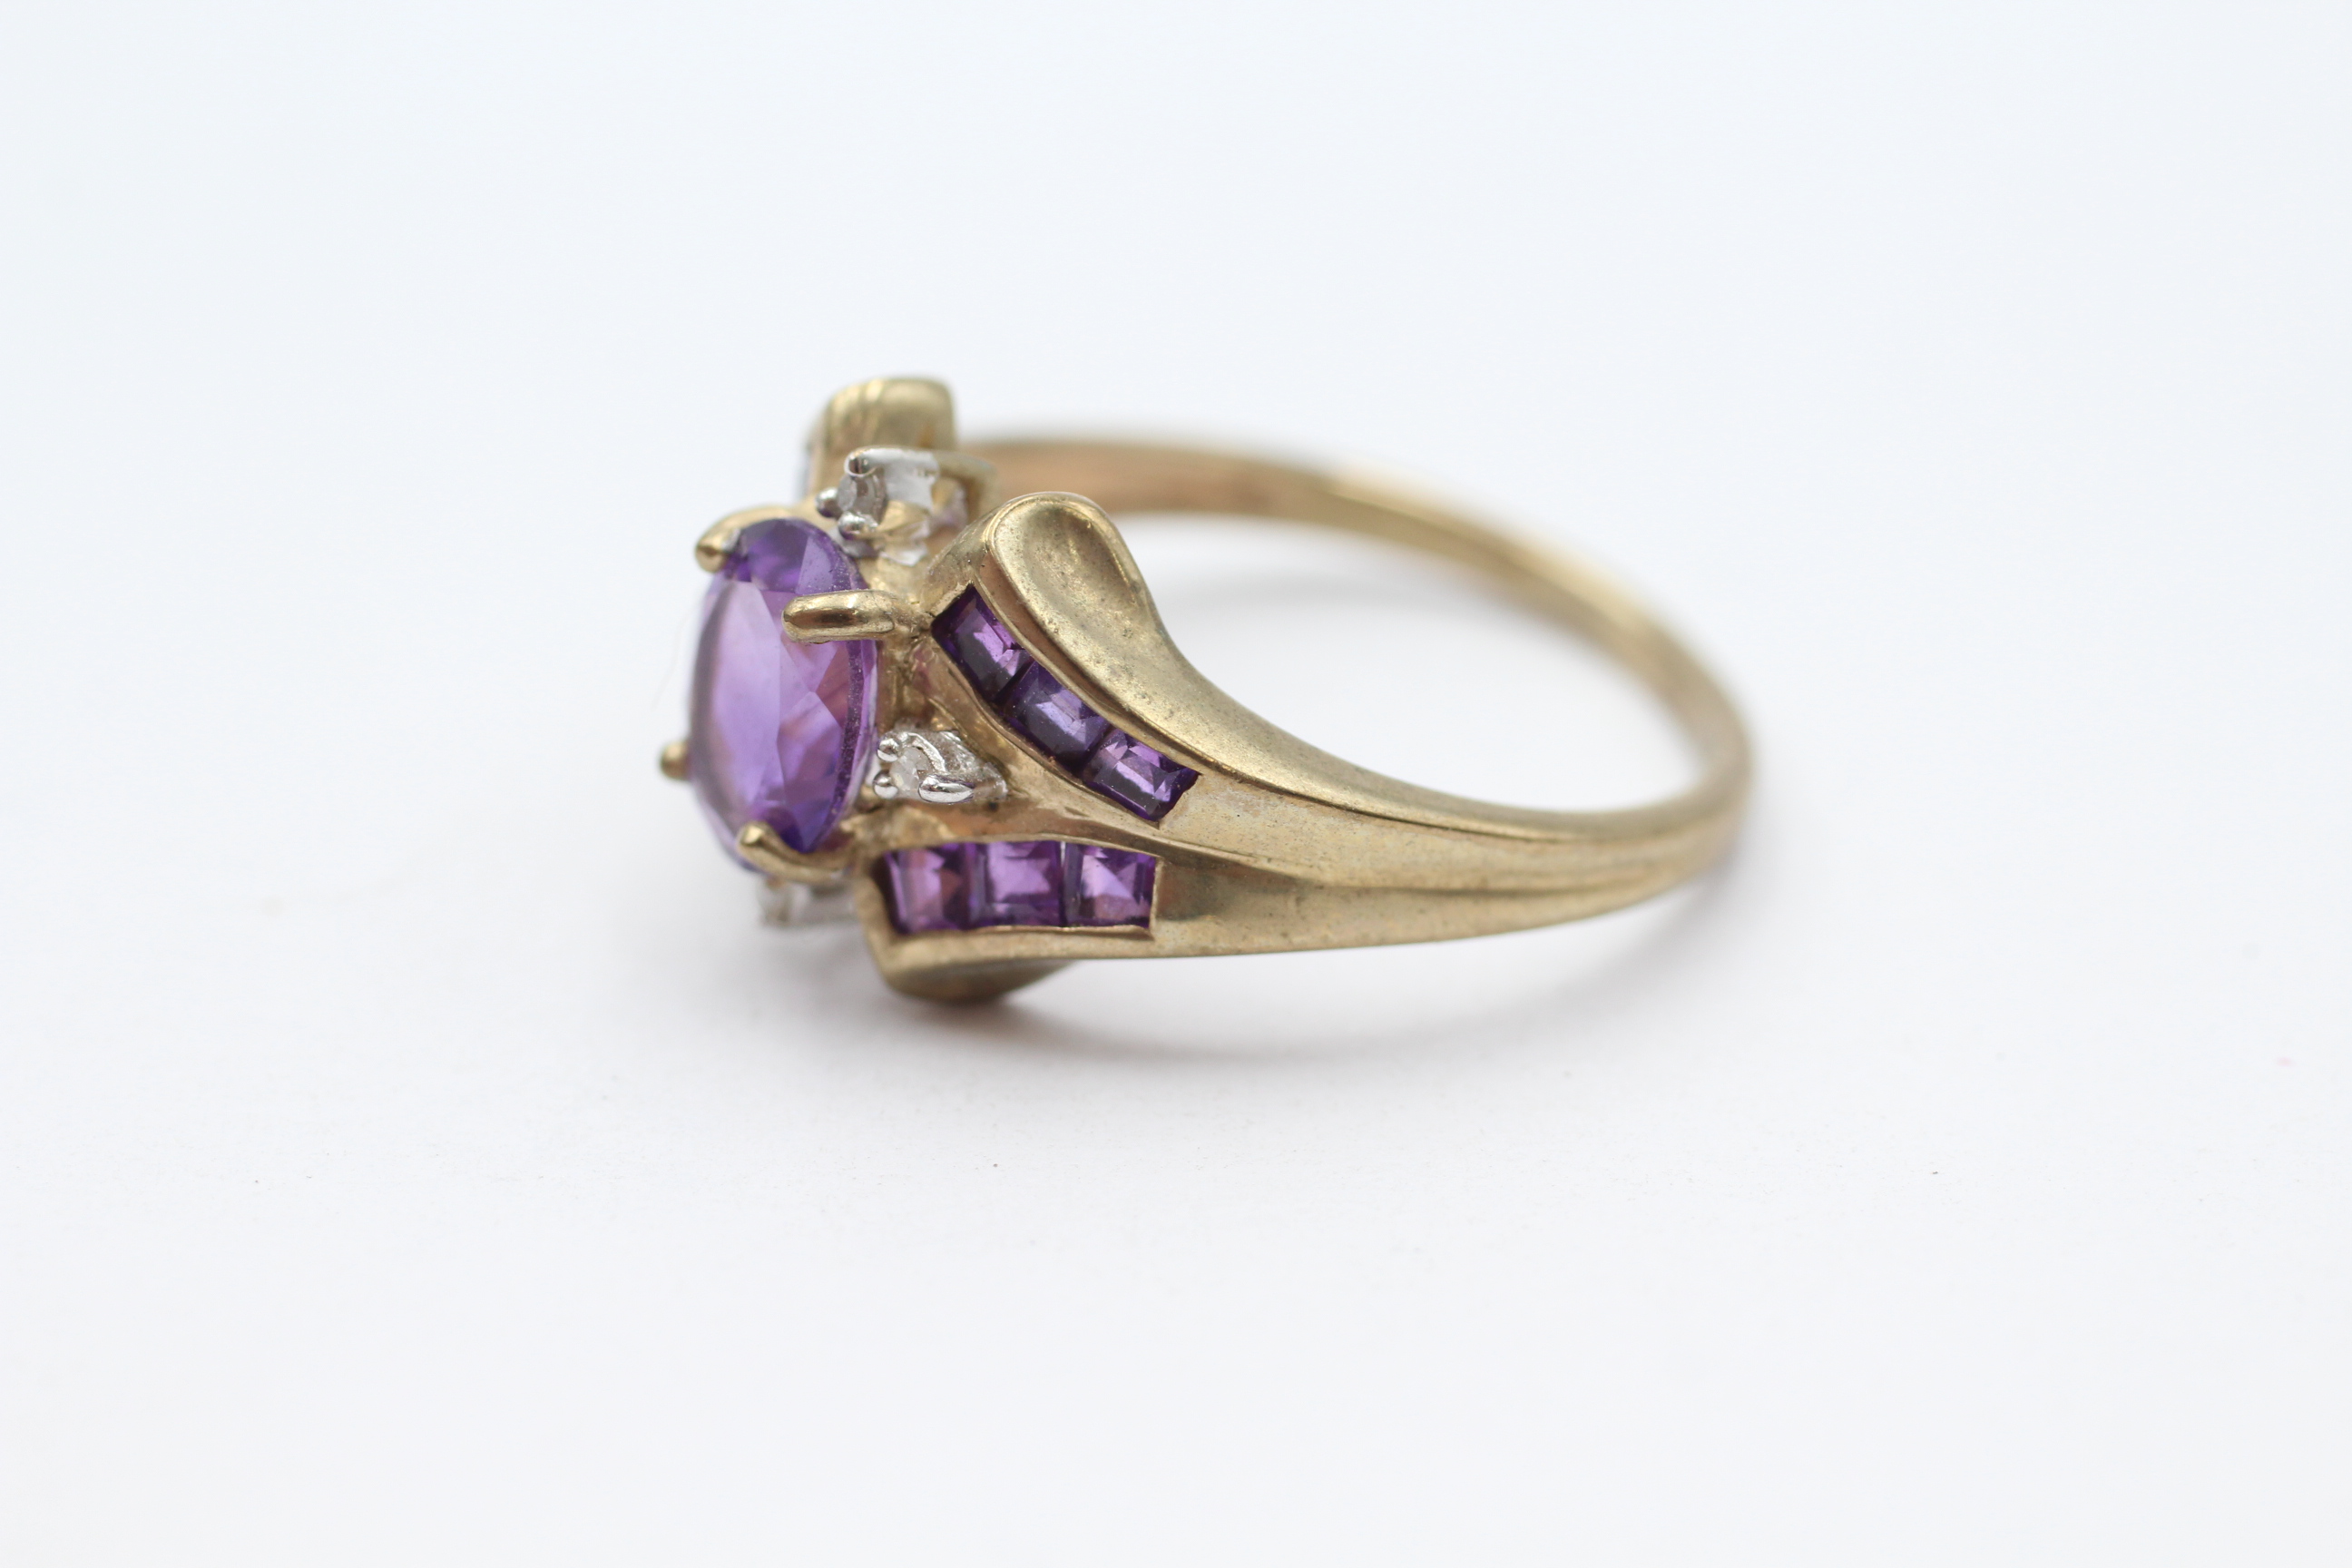 9ct gold diamond & amethyst cluster ring with tapered shank Size P 1/2 - 3.2 g - Image 3 of 4